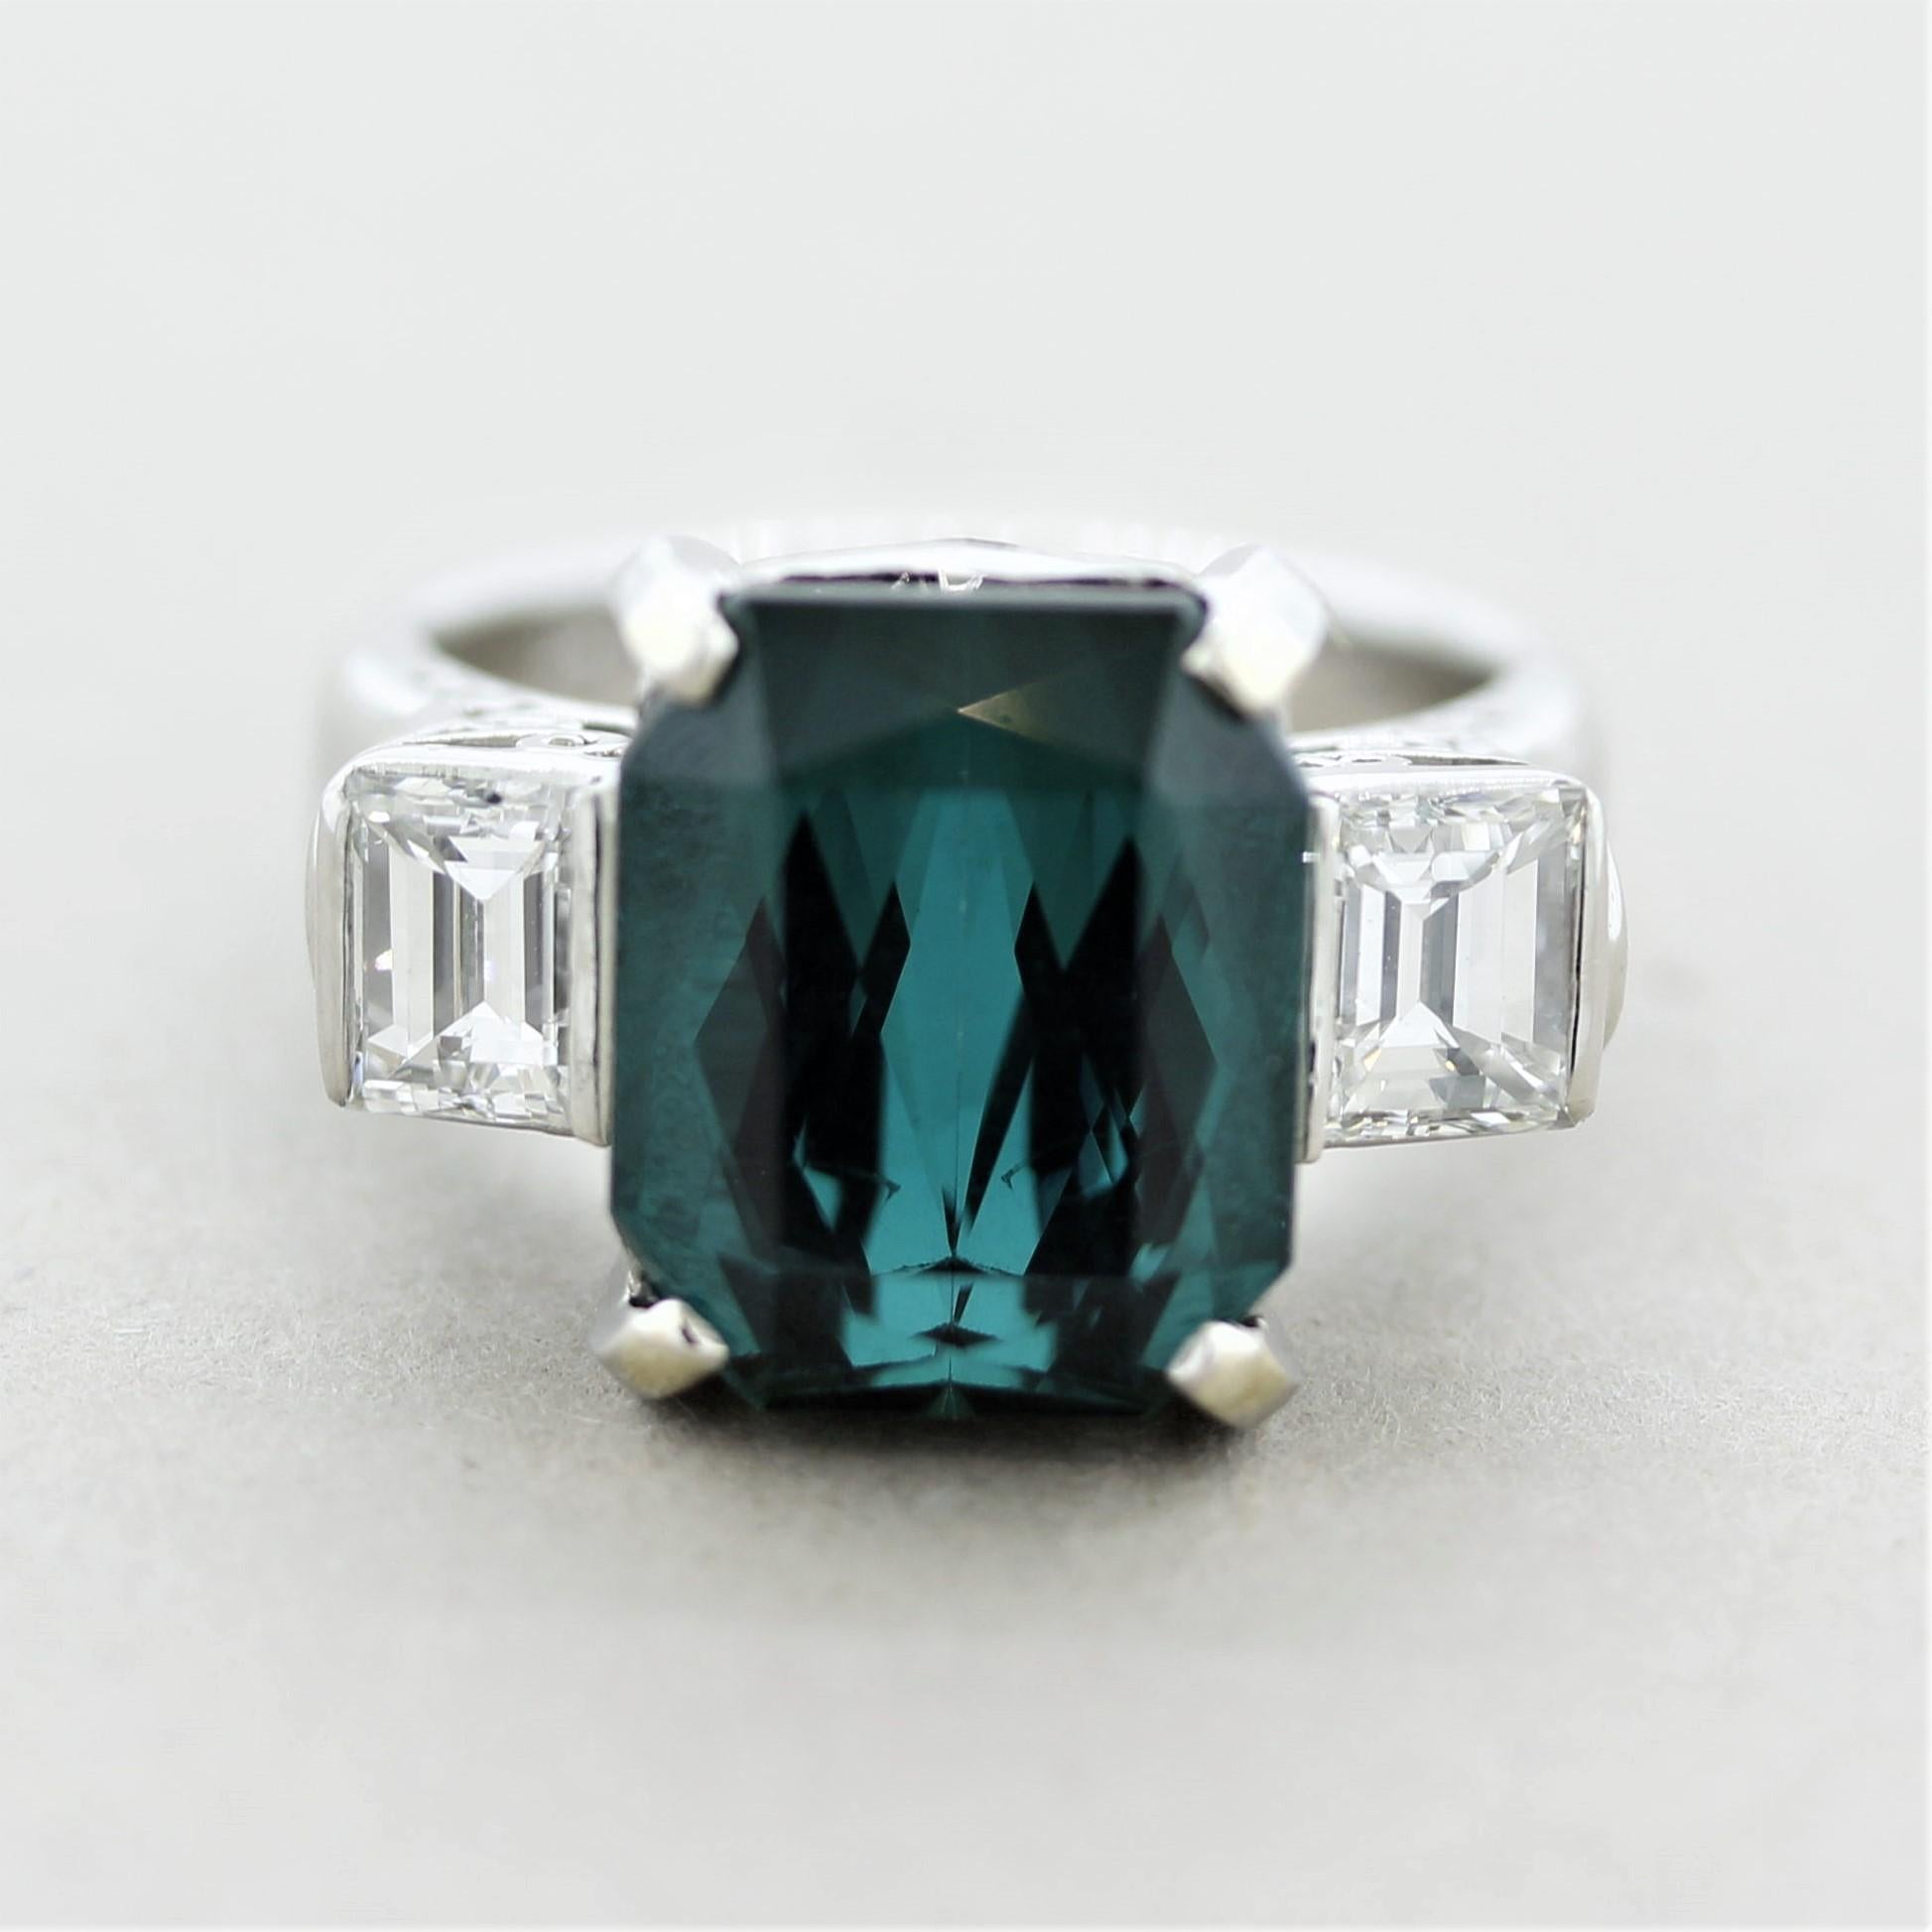 A fine and natural tourmaline with a gemmy greenish-blue color giving it the name “indicolite” in the trade. It weighs 7.31 carats with an intense yet bright vivid greenish-blue color, a true top-quality stone. It is accented by 2 large baguette-cut